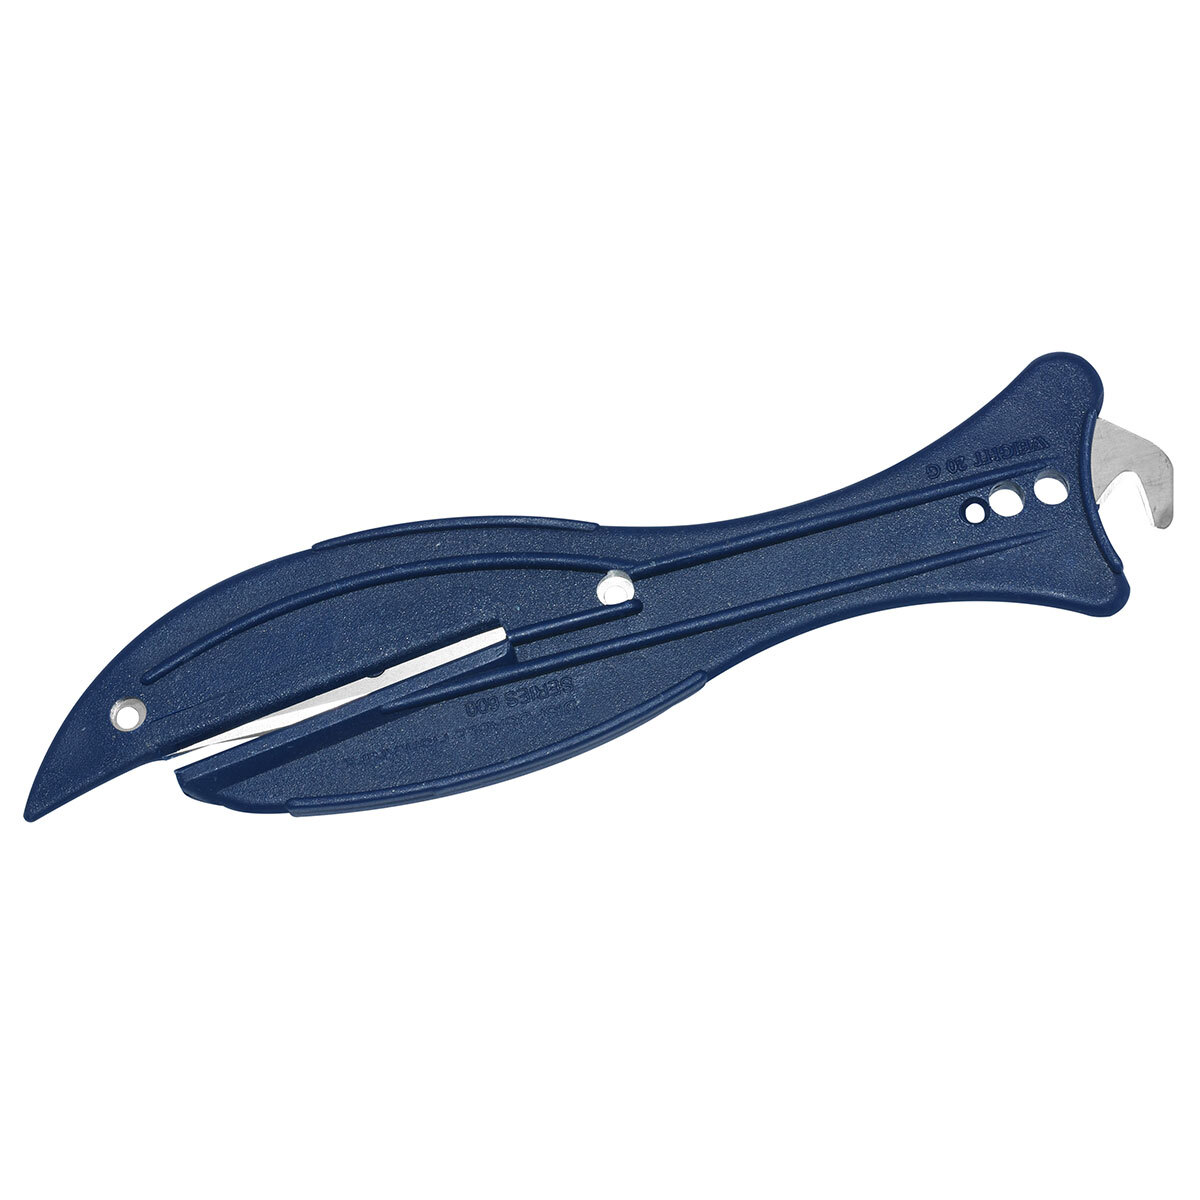 Metal Detectable Fish Safety Knife